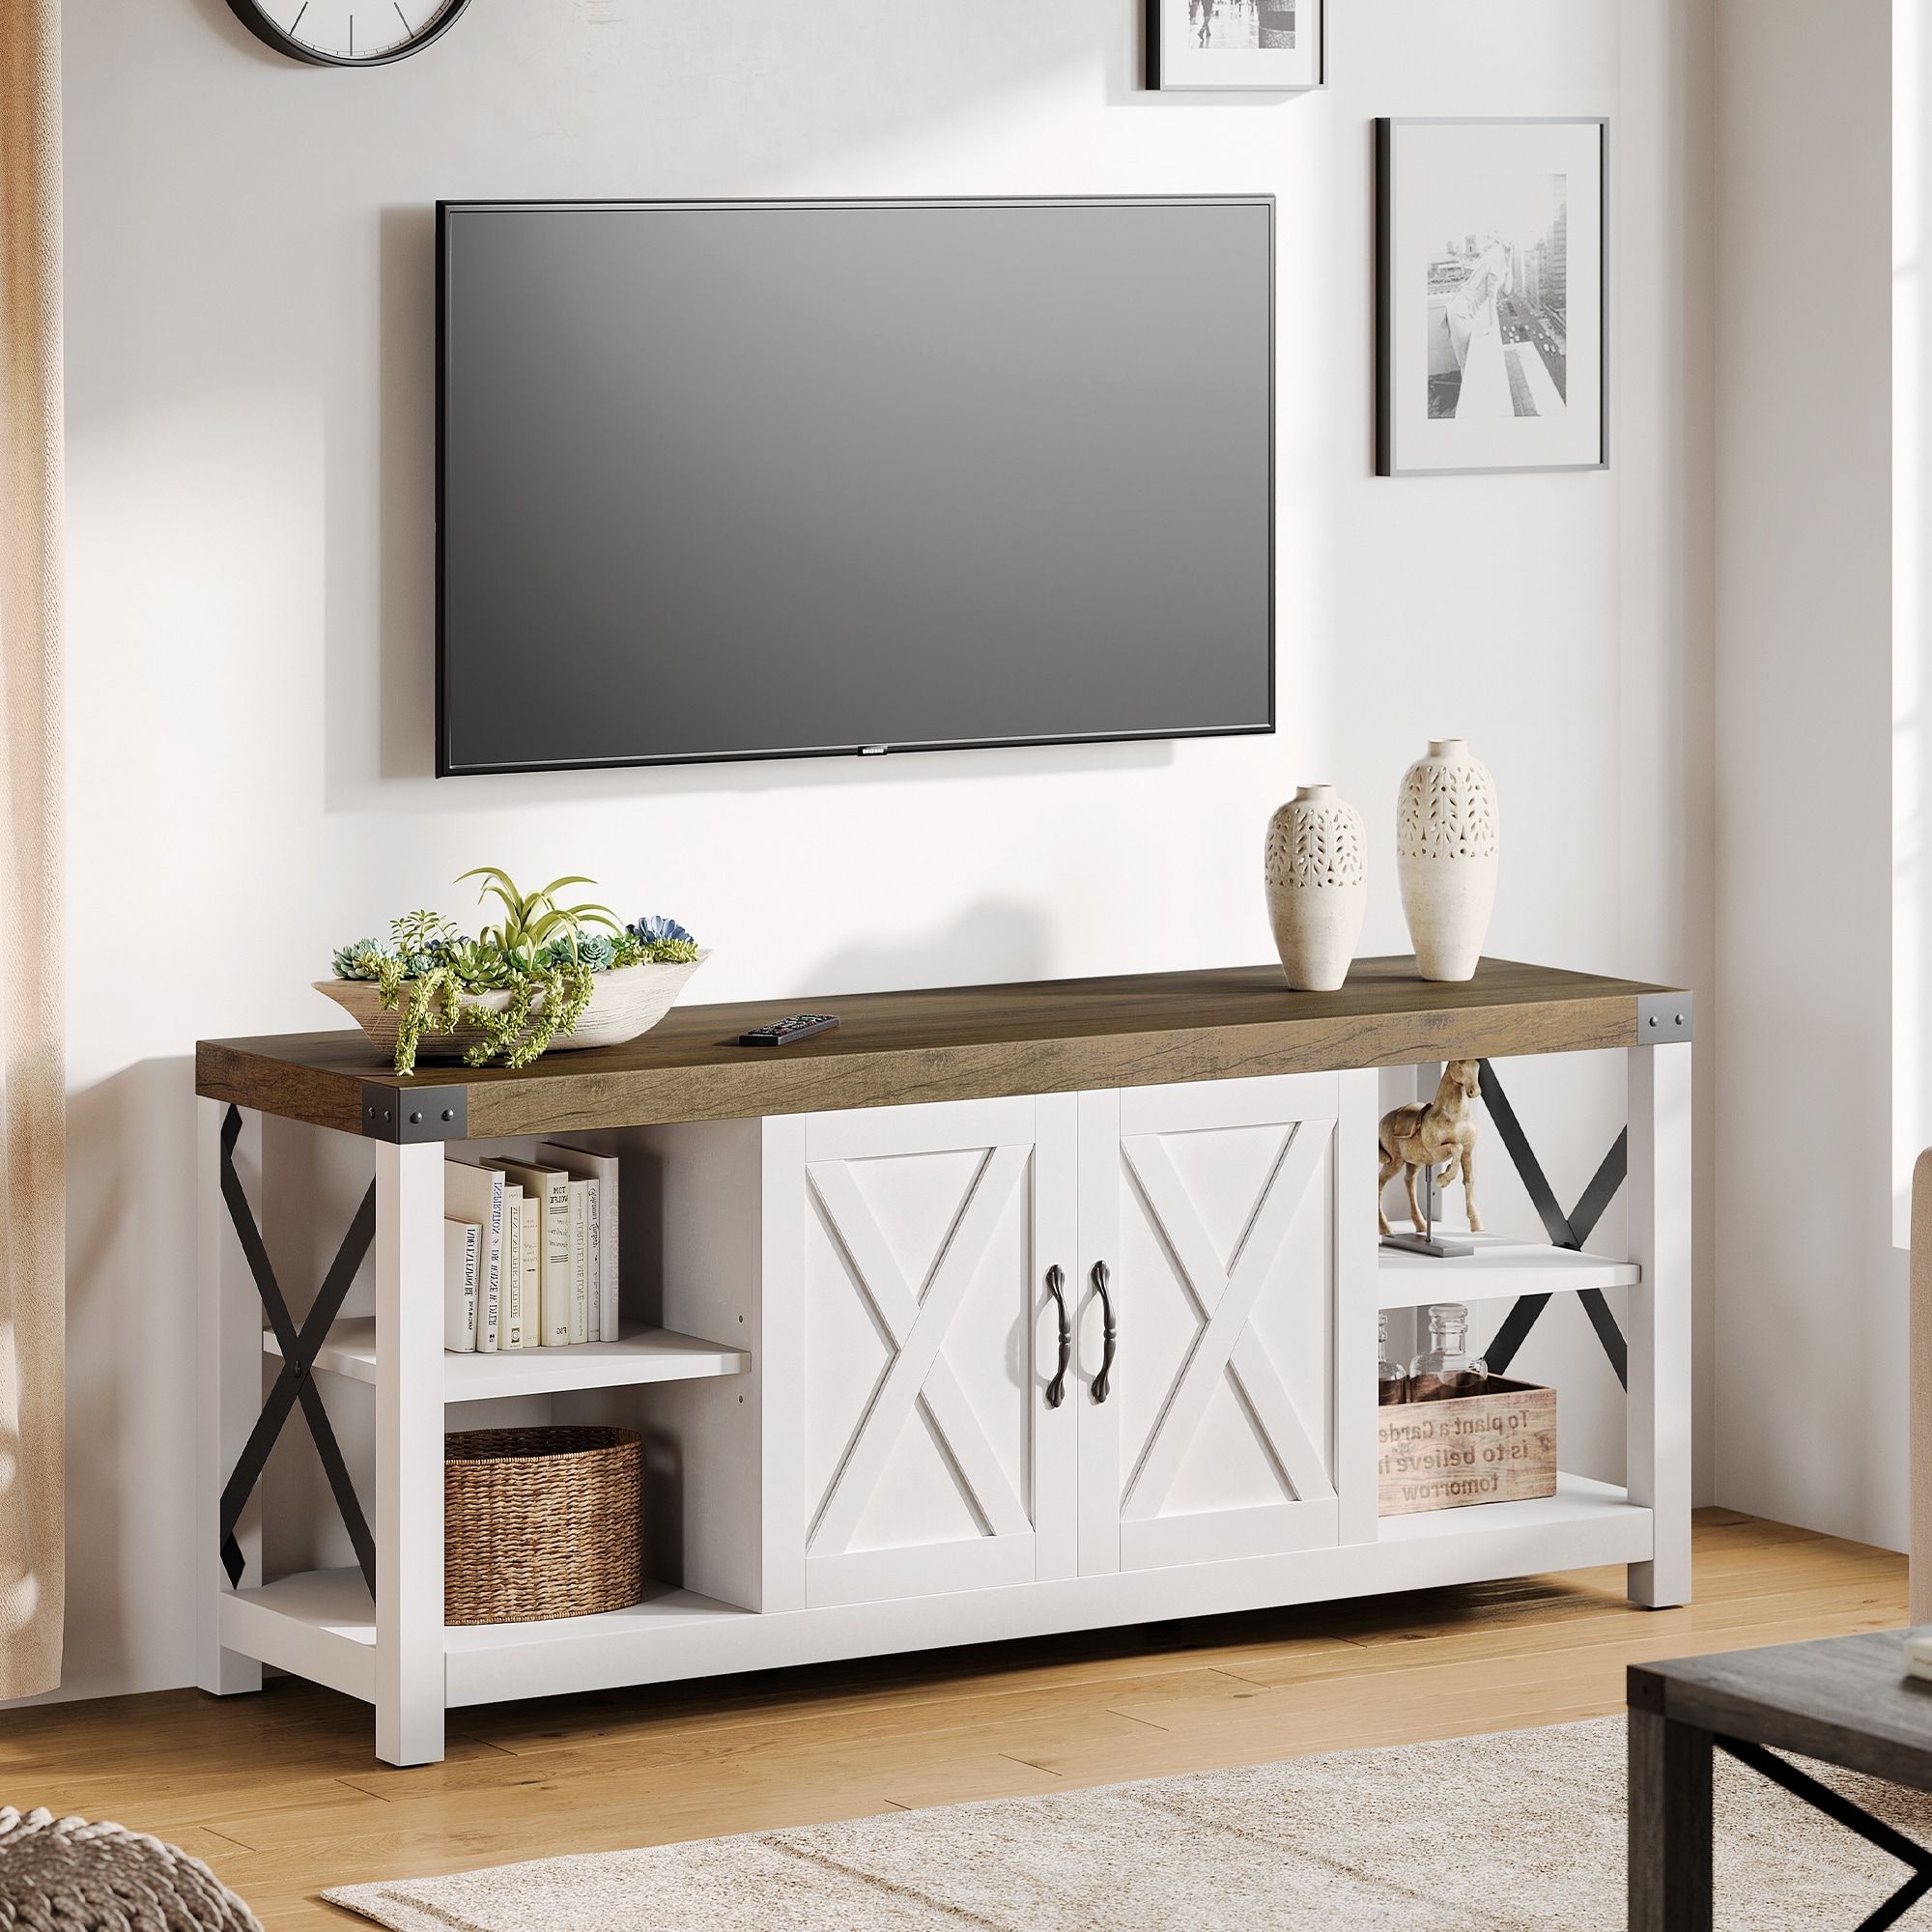 59 Inch Tv Stand For Tv Up To 50 60 65 Inches, Farmhouse Wood Tv Cabinet  Entertainment Center – 59" – On Sale – Bed Bath & Beyond – 36742172 In Farmhouse Stands For Tvs (View 16 of 20)